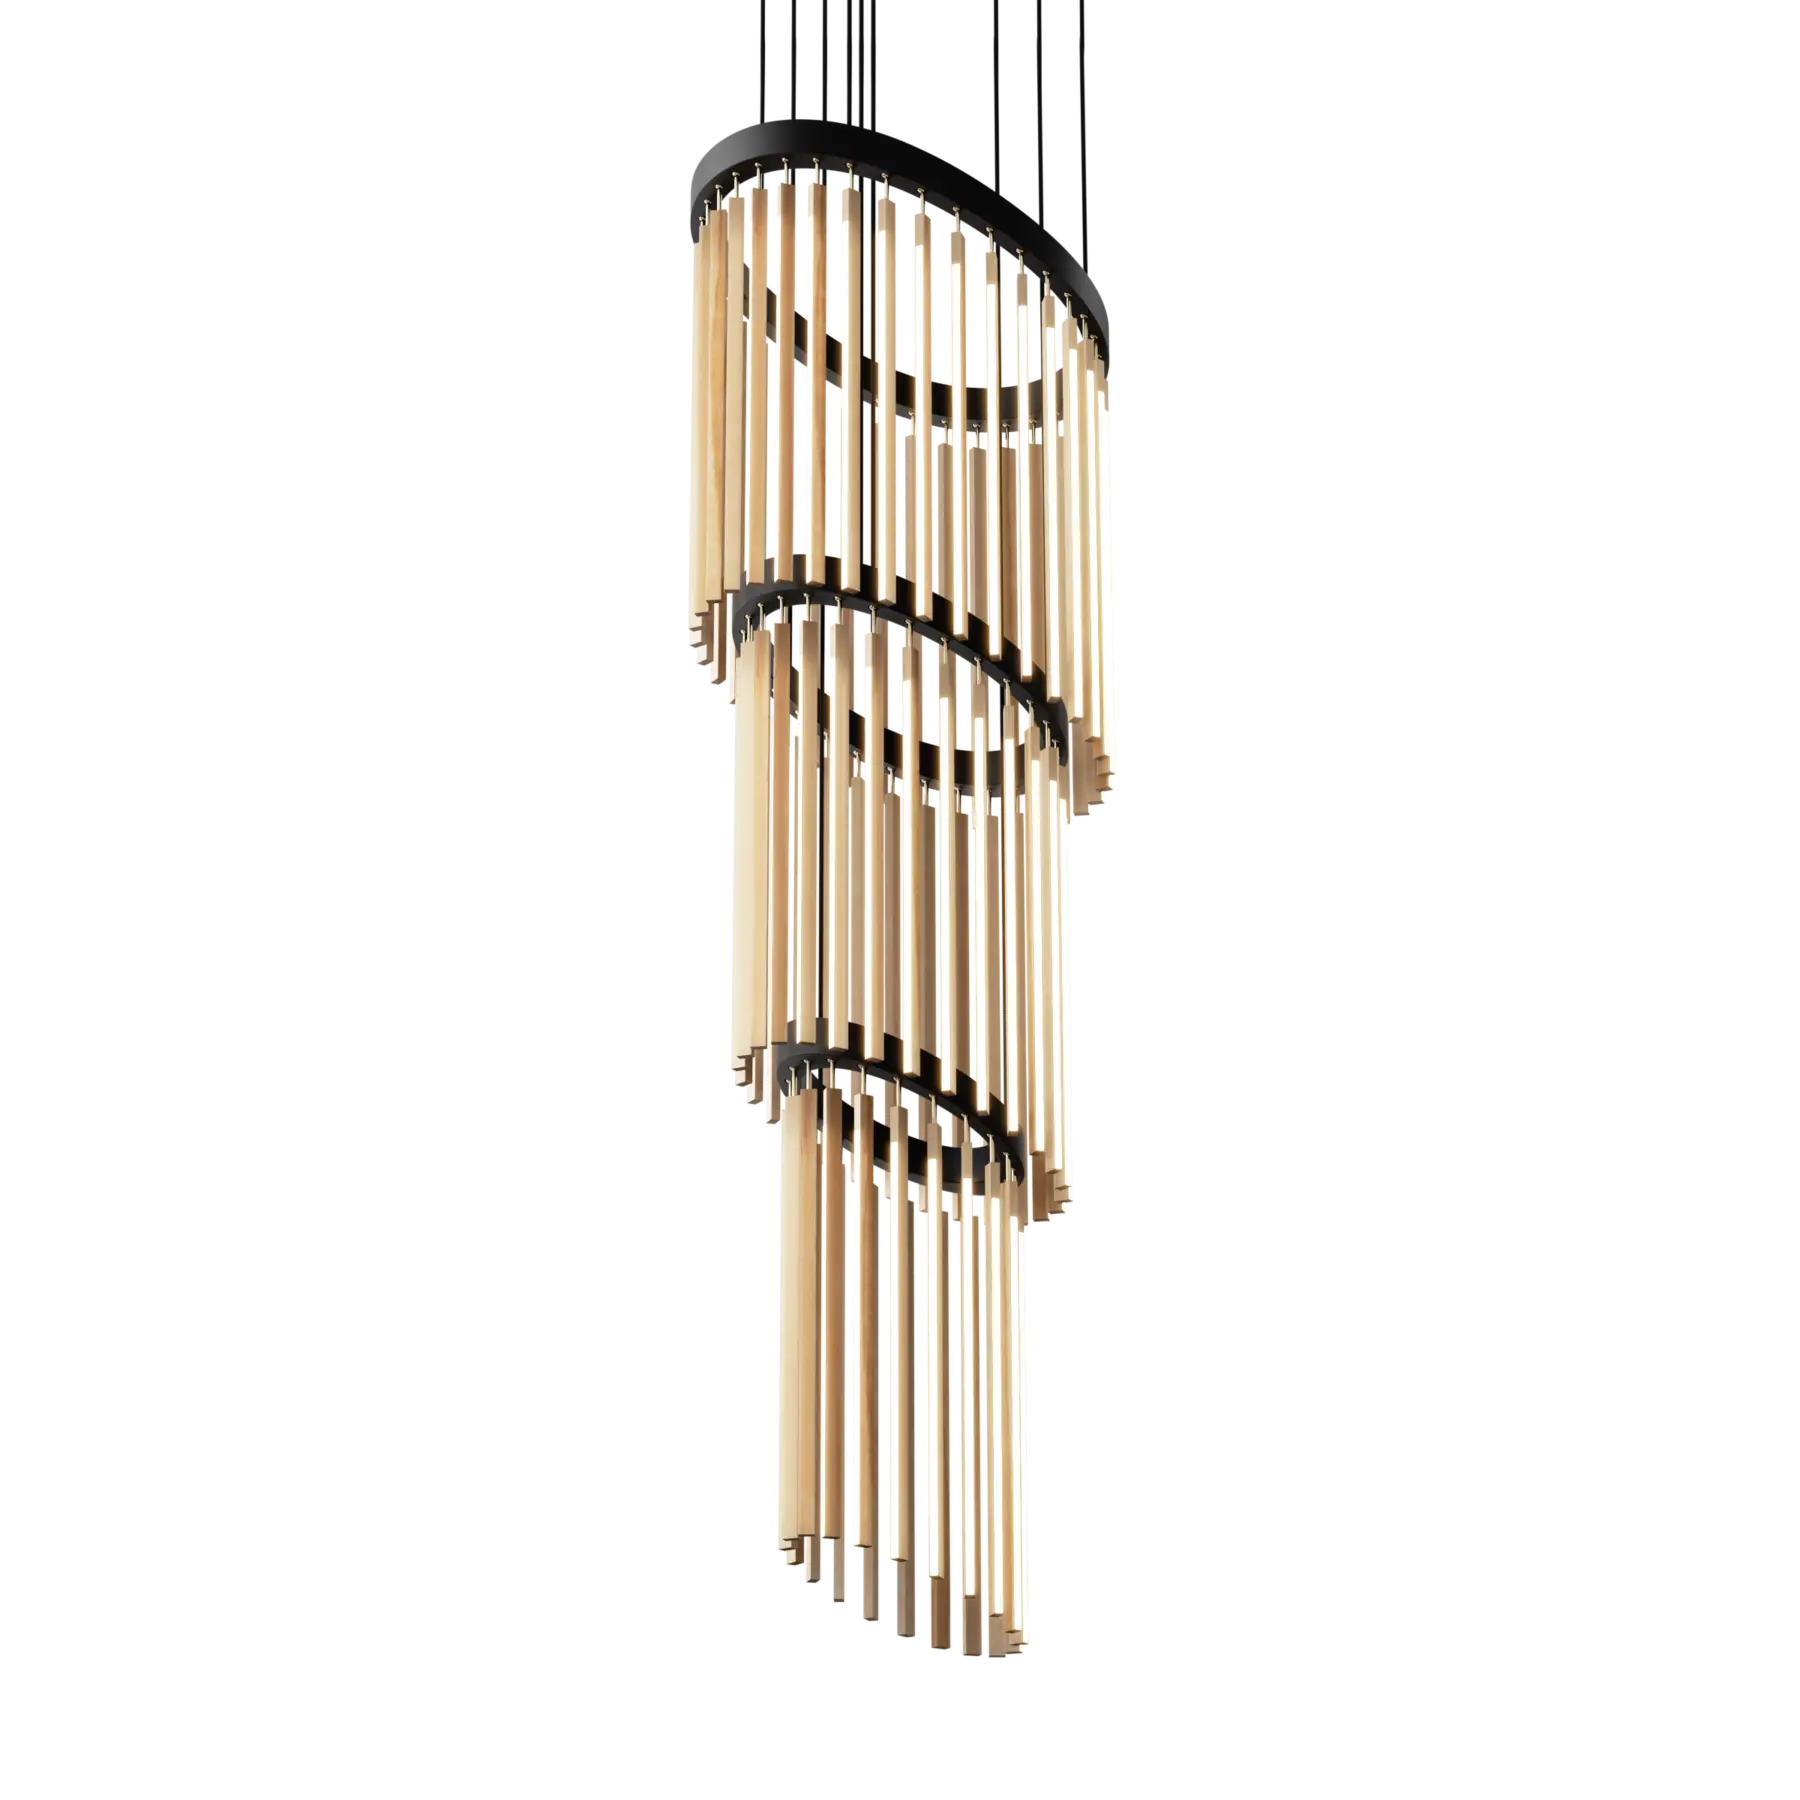 Image of a Stickbulb Chime Cascade lighting fixture. The modern fixture consists of sleek wooden beams with multiple integrated LED bulbs.